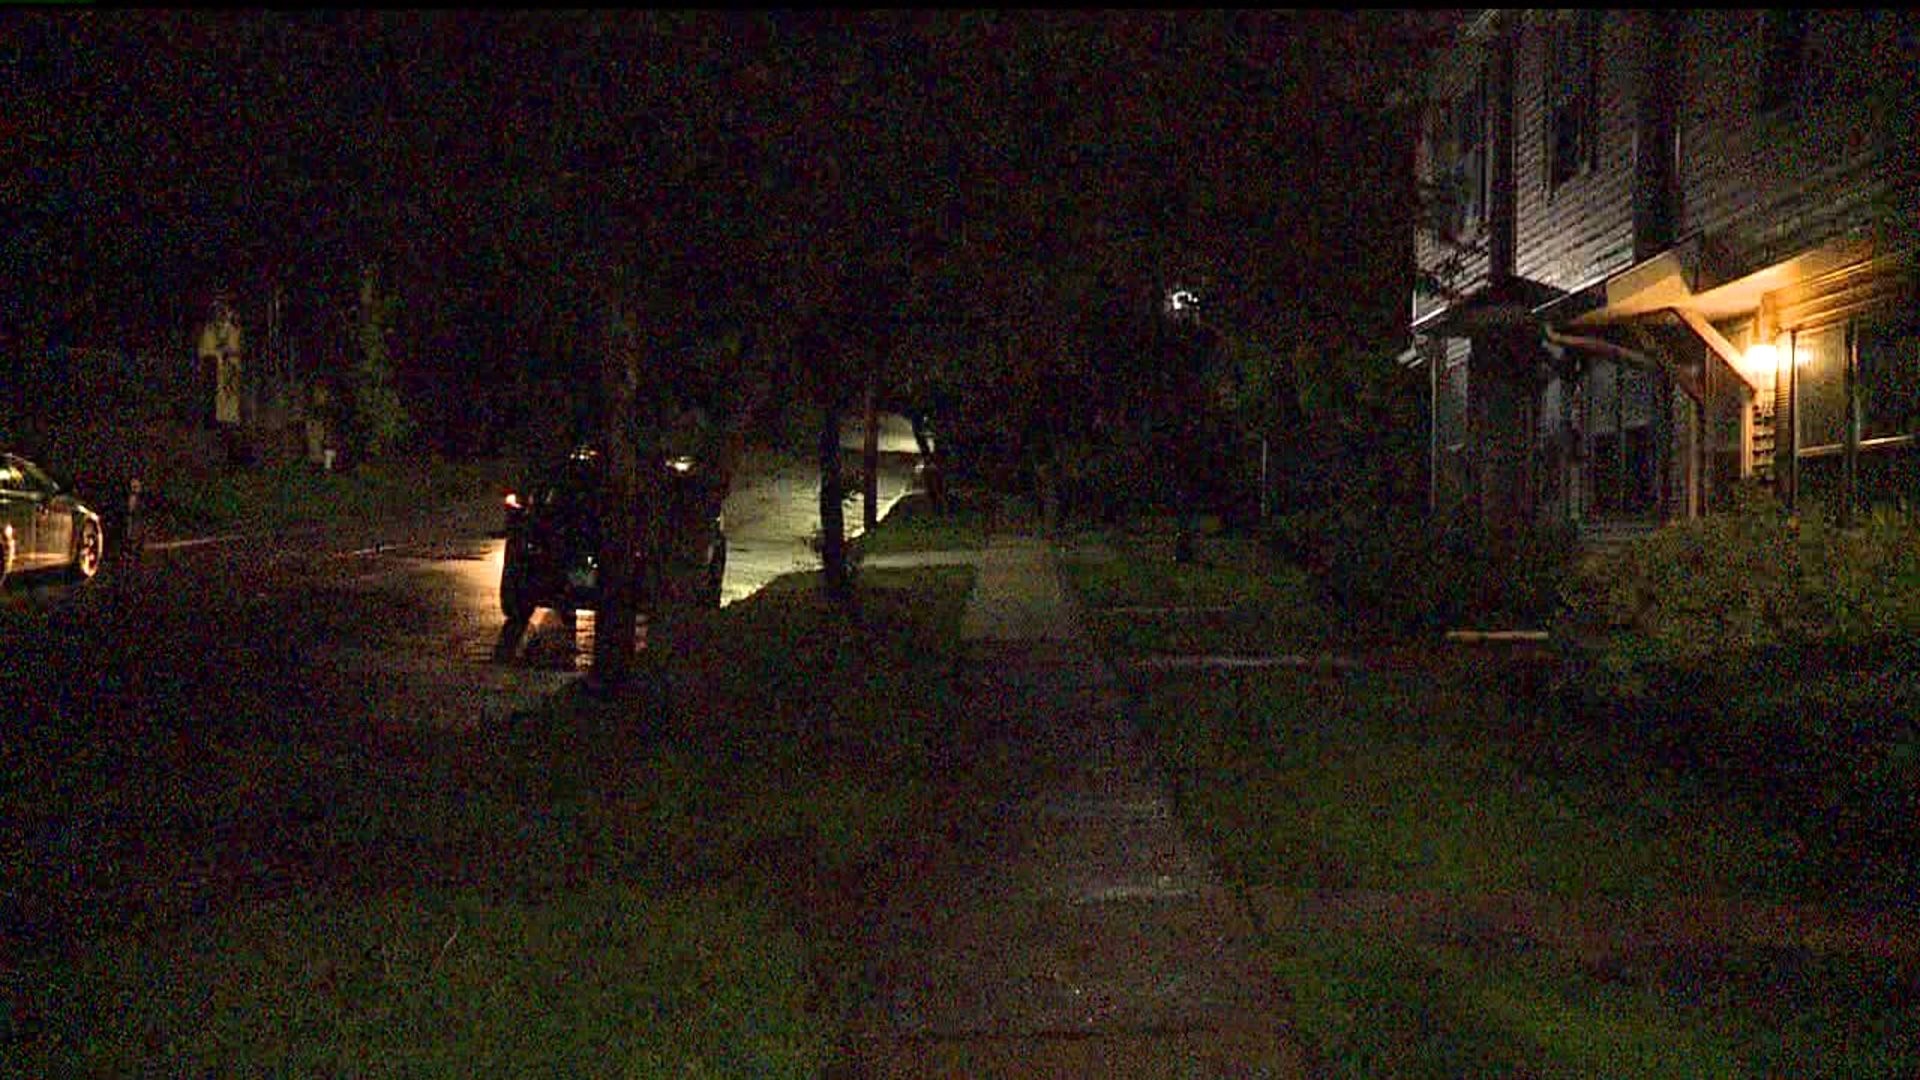 One person hurt after shooting in Davenport